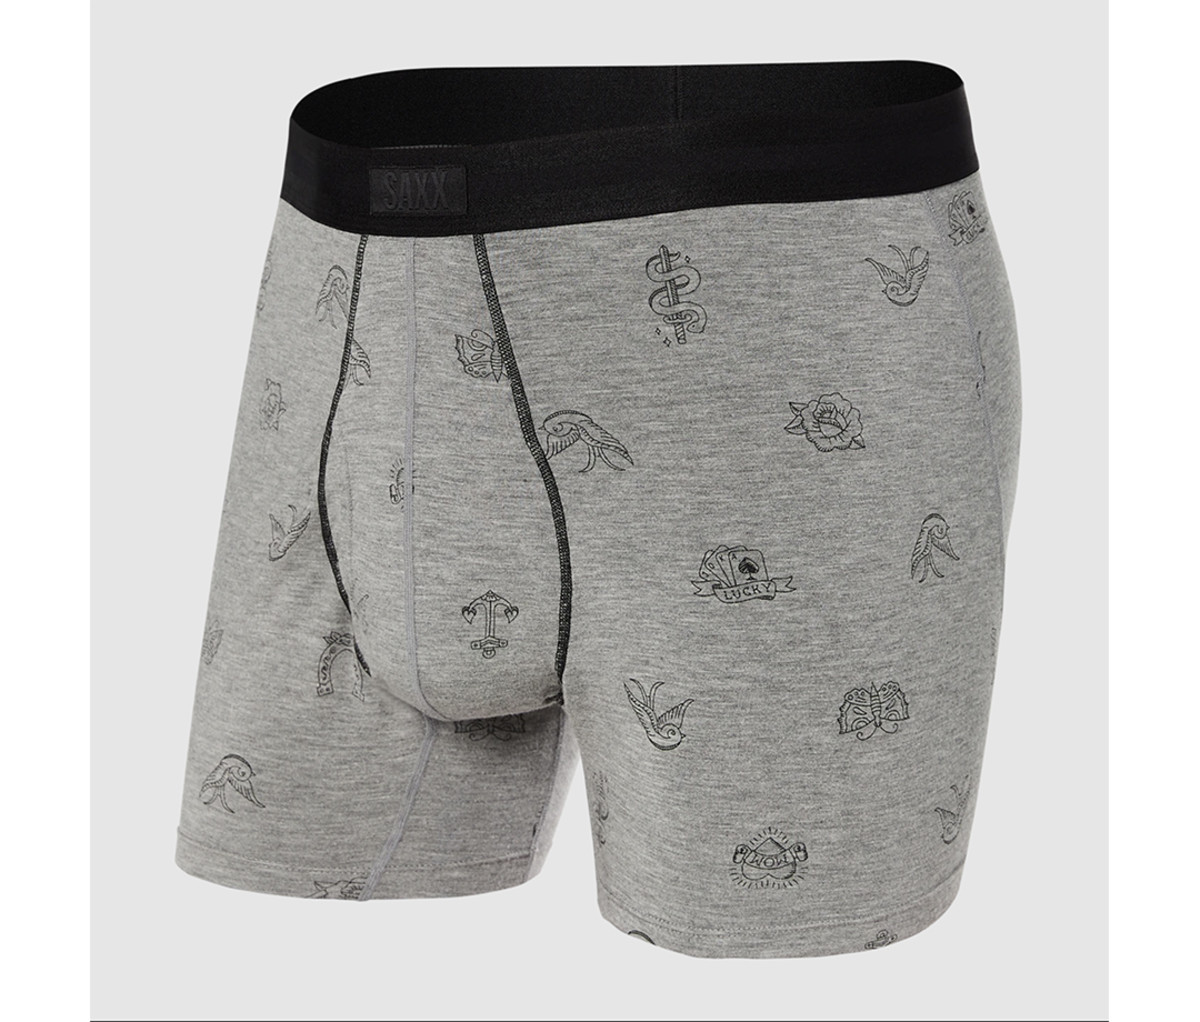 Cashmere Underwear From Saxx Will Make a Great Gift This Holiday - Men's  Journal